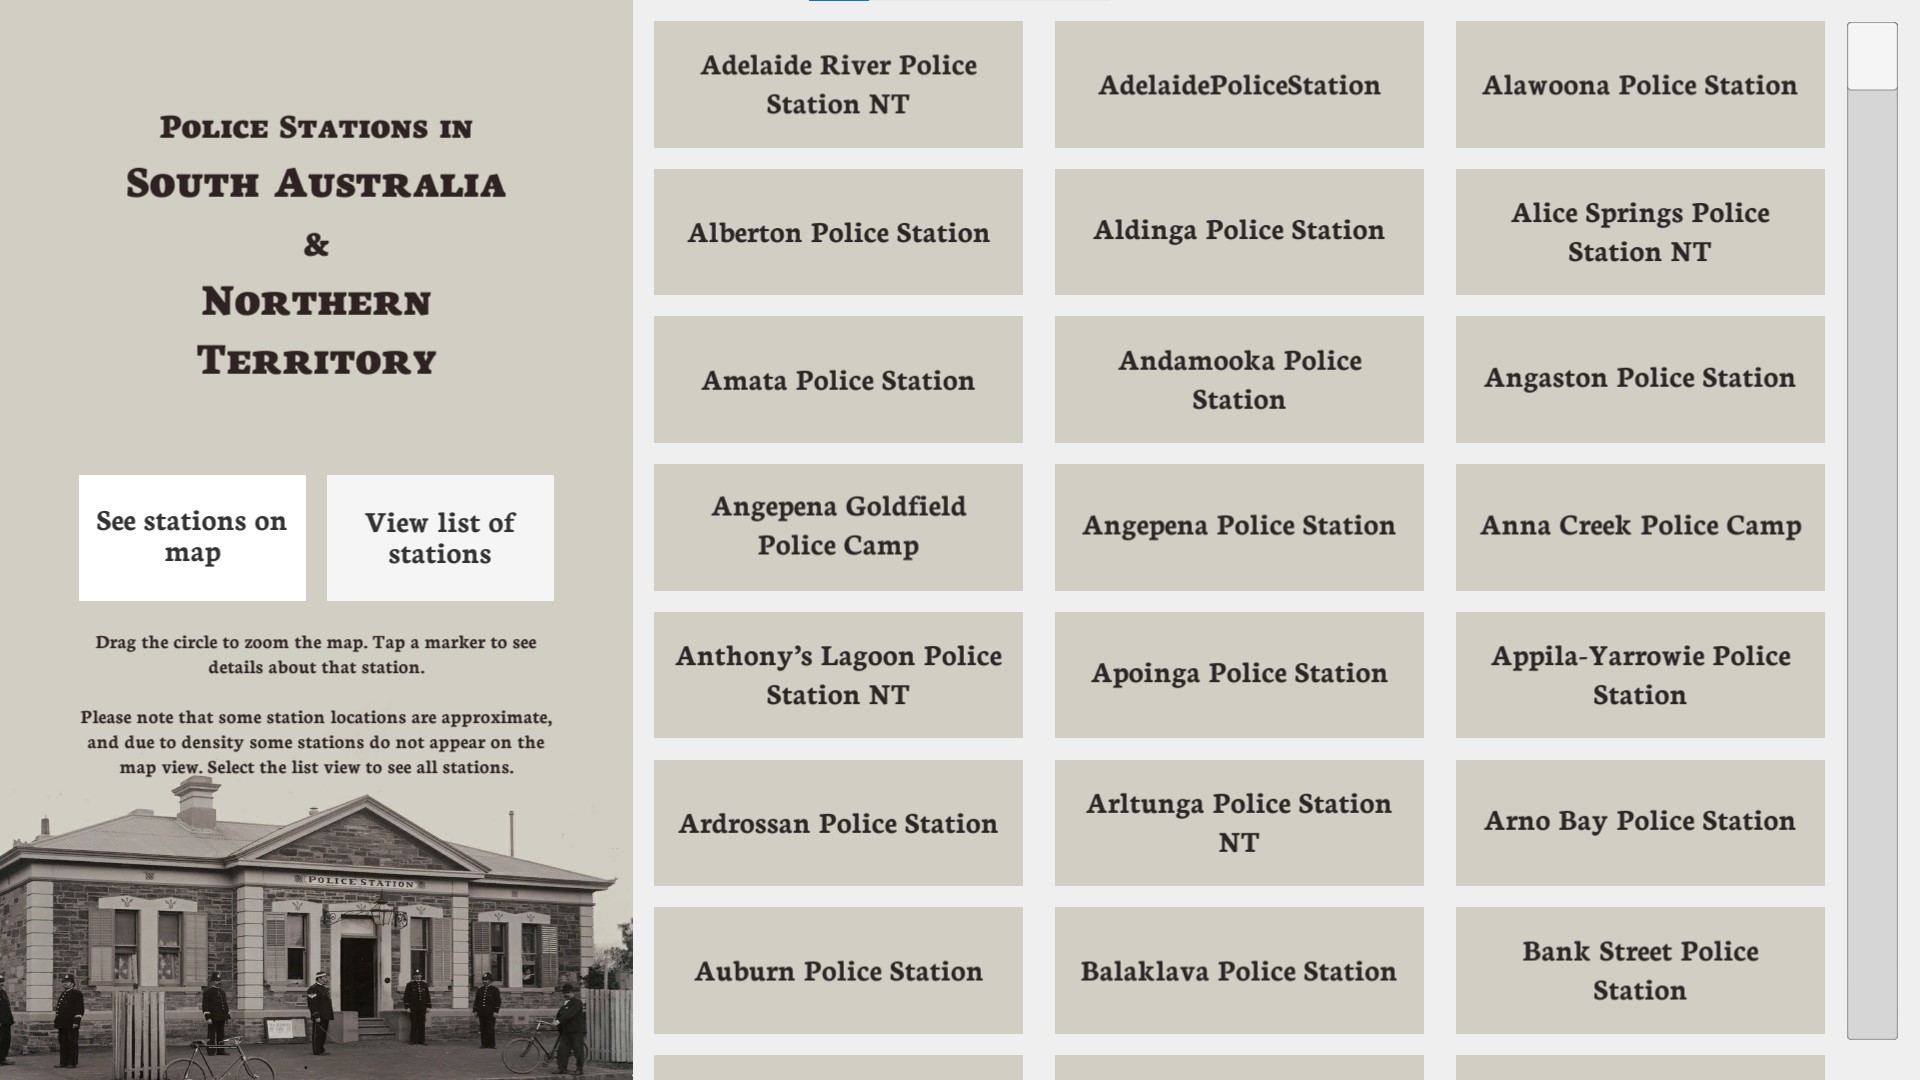 A screenshot of the station map museum kiosk, showing a list of police station names